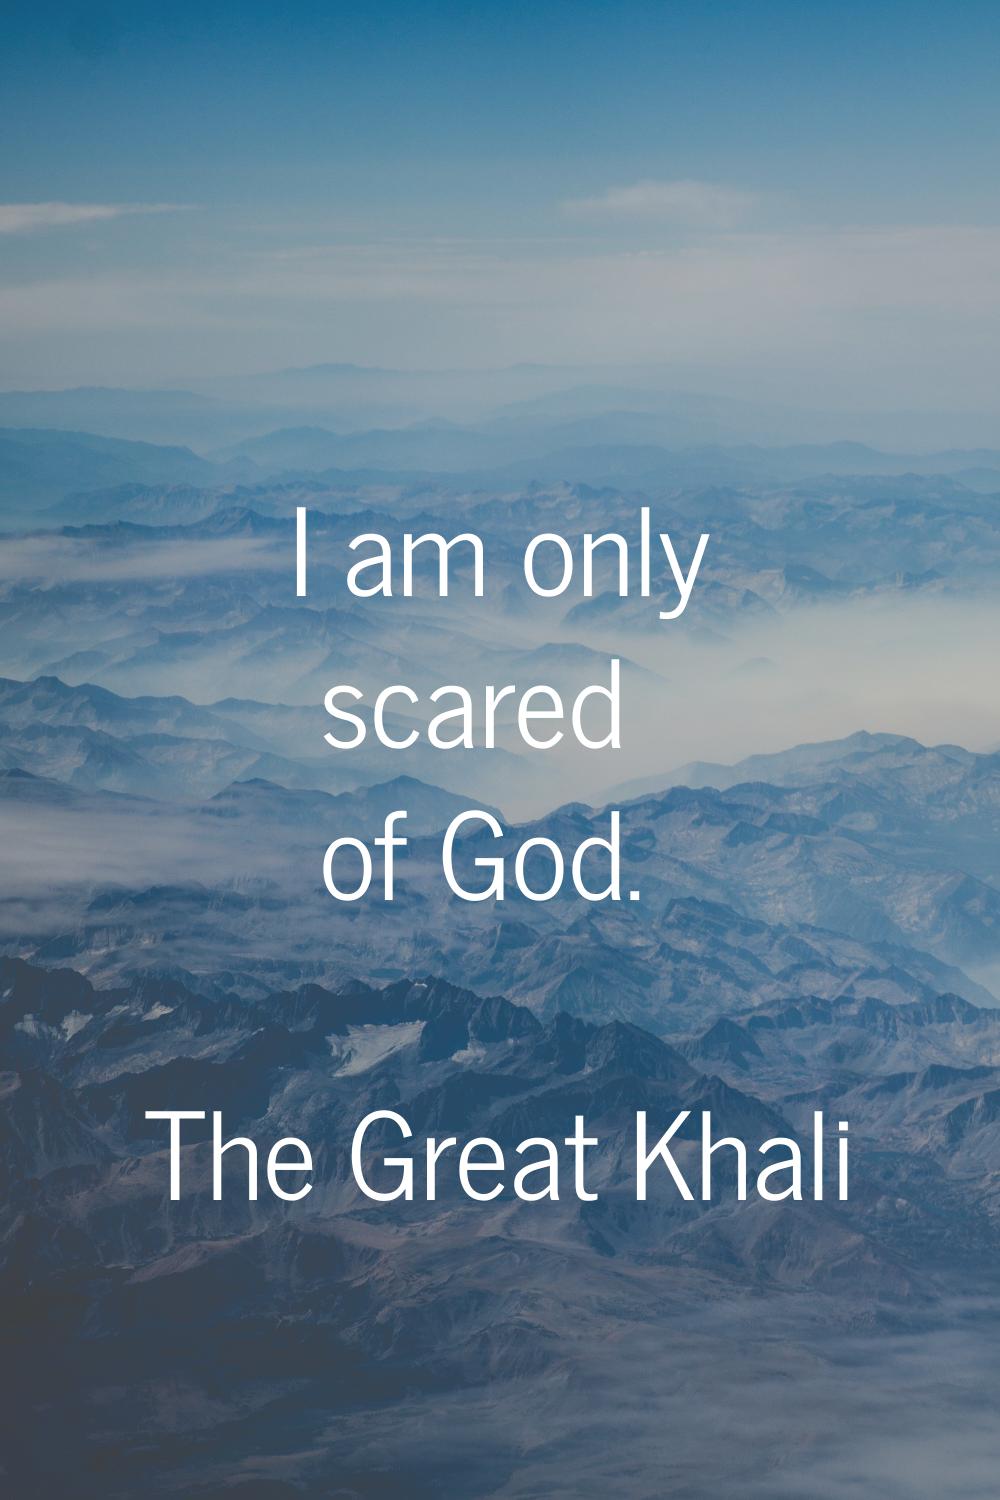 I am only scared of God.